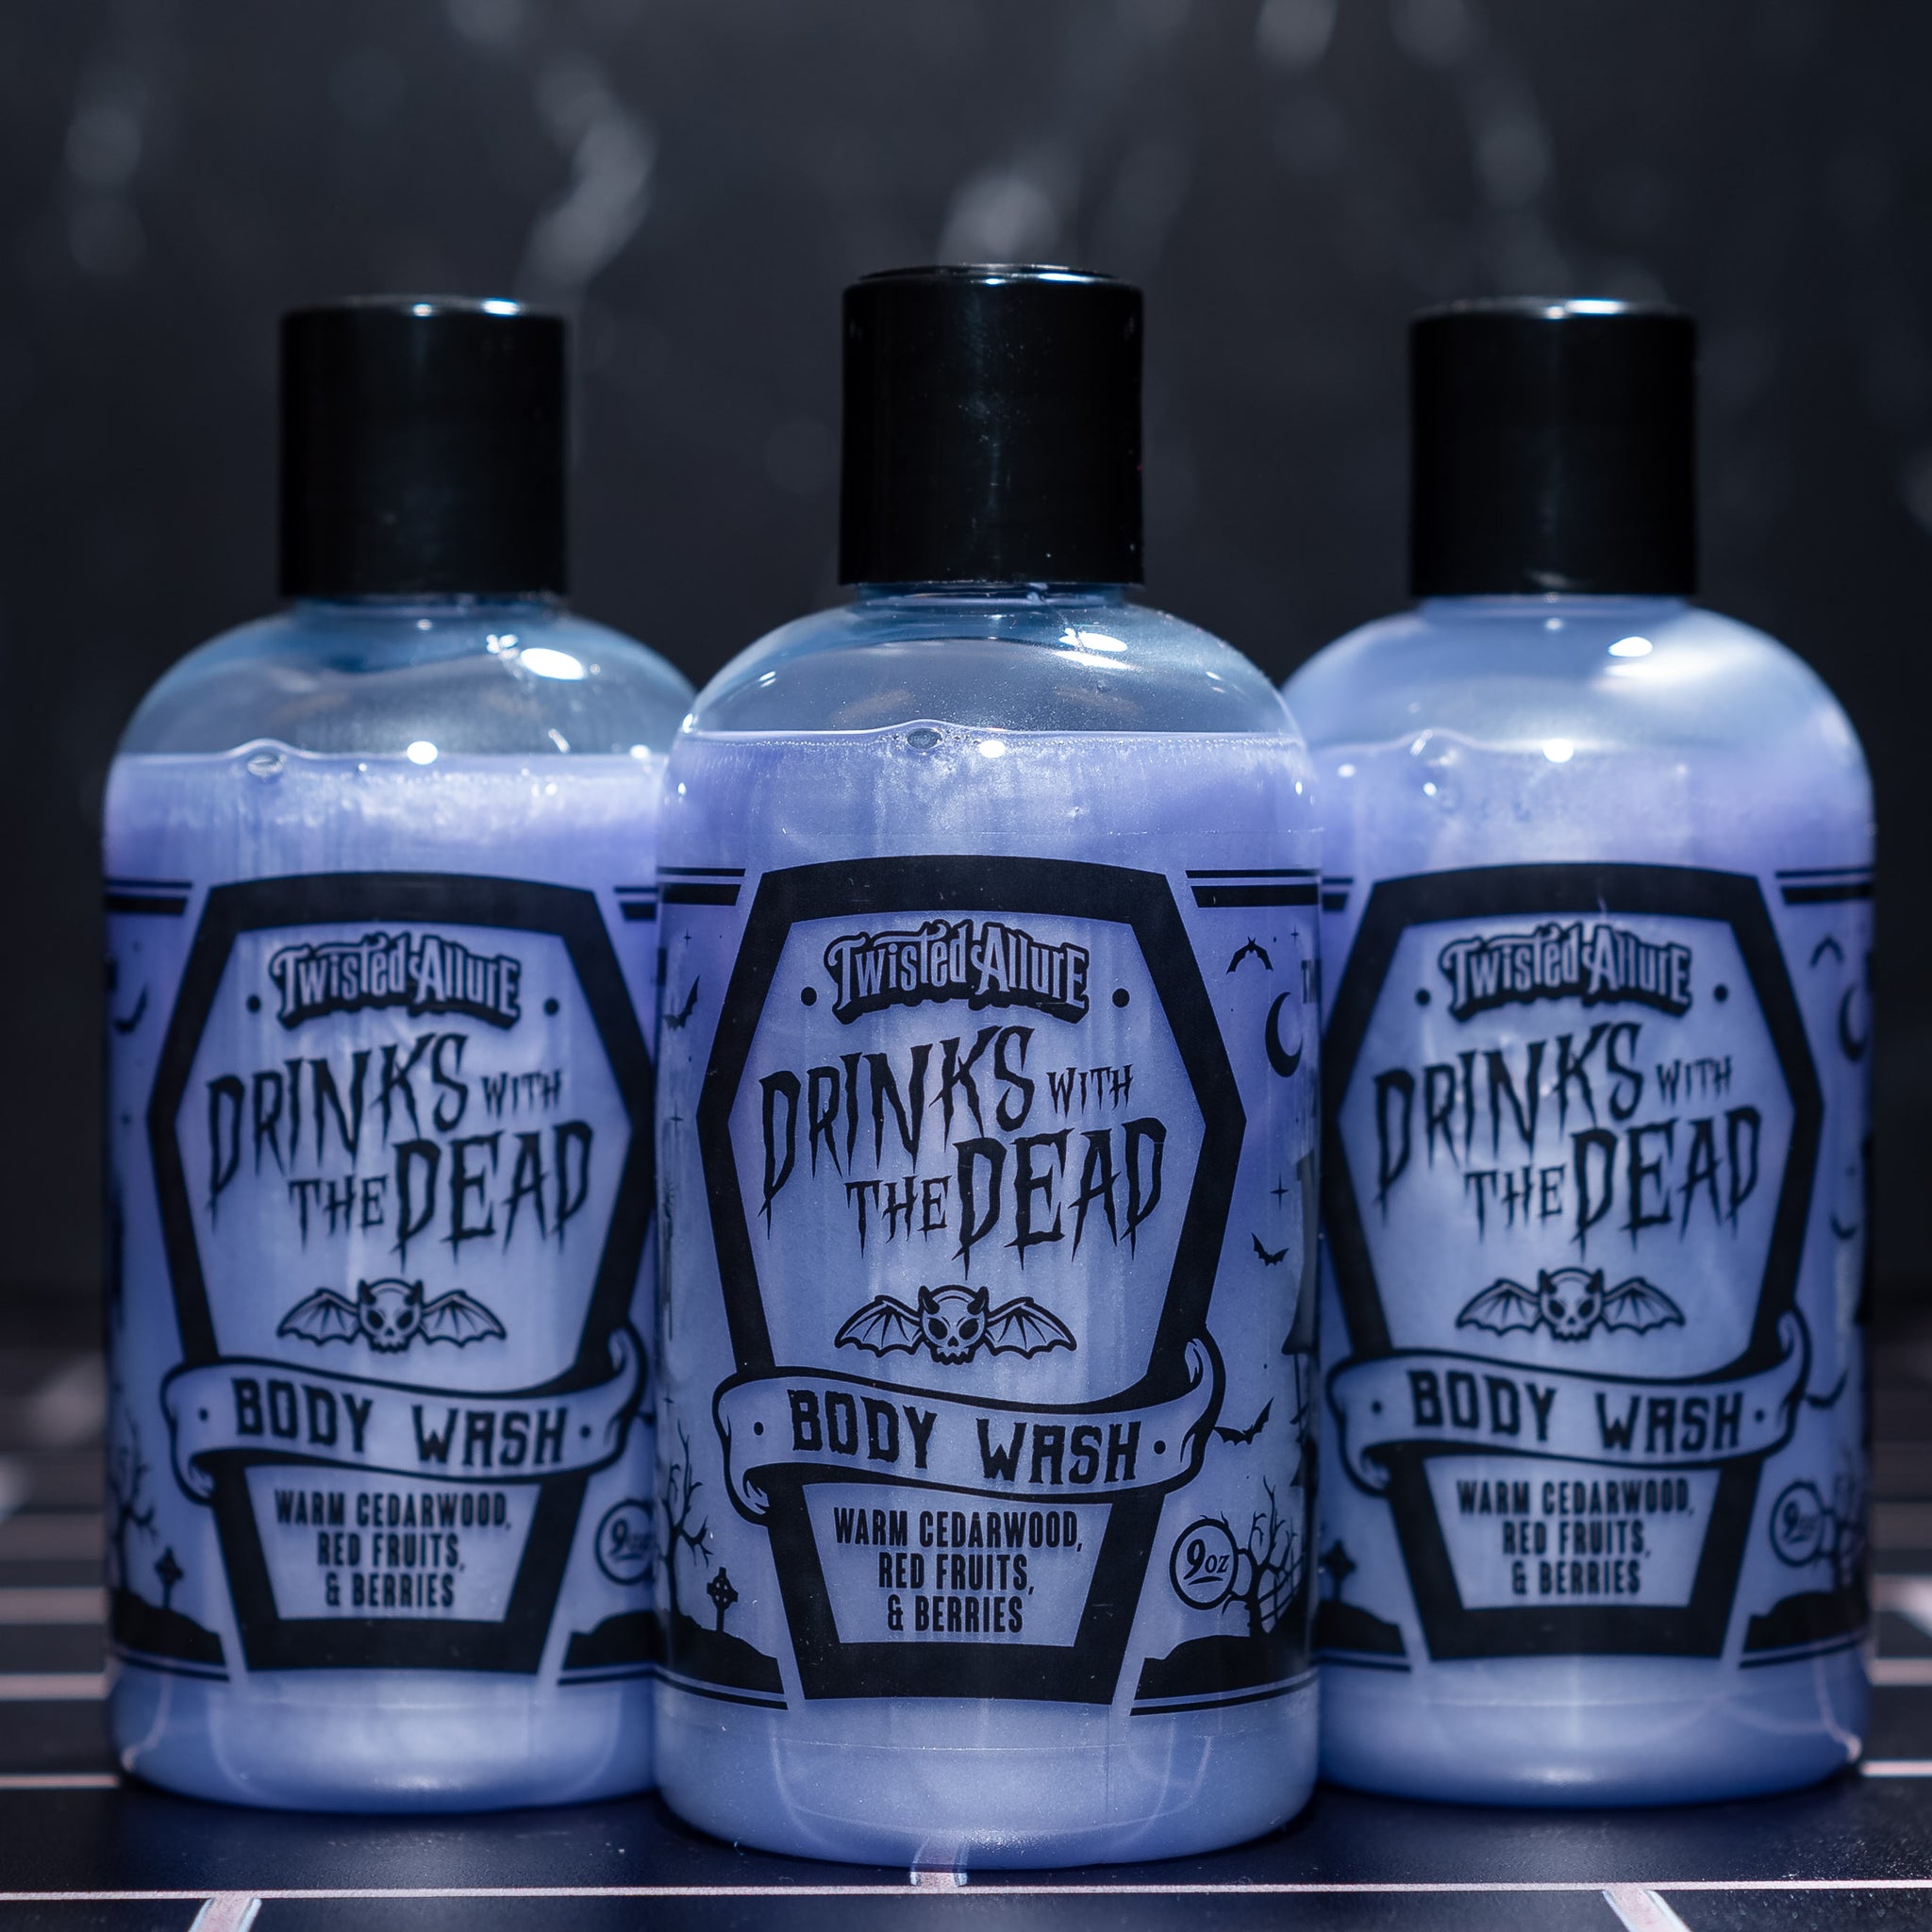 Drinks with the Dead Body Wash (Cedarwood, red fruits & Berries)